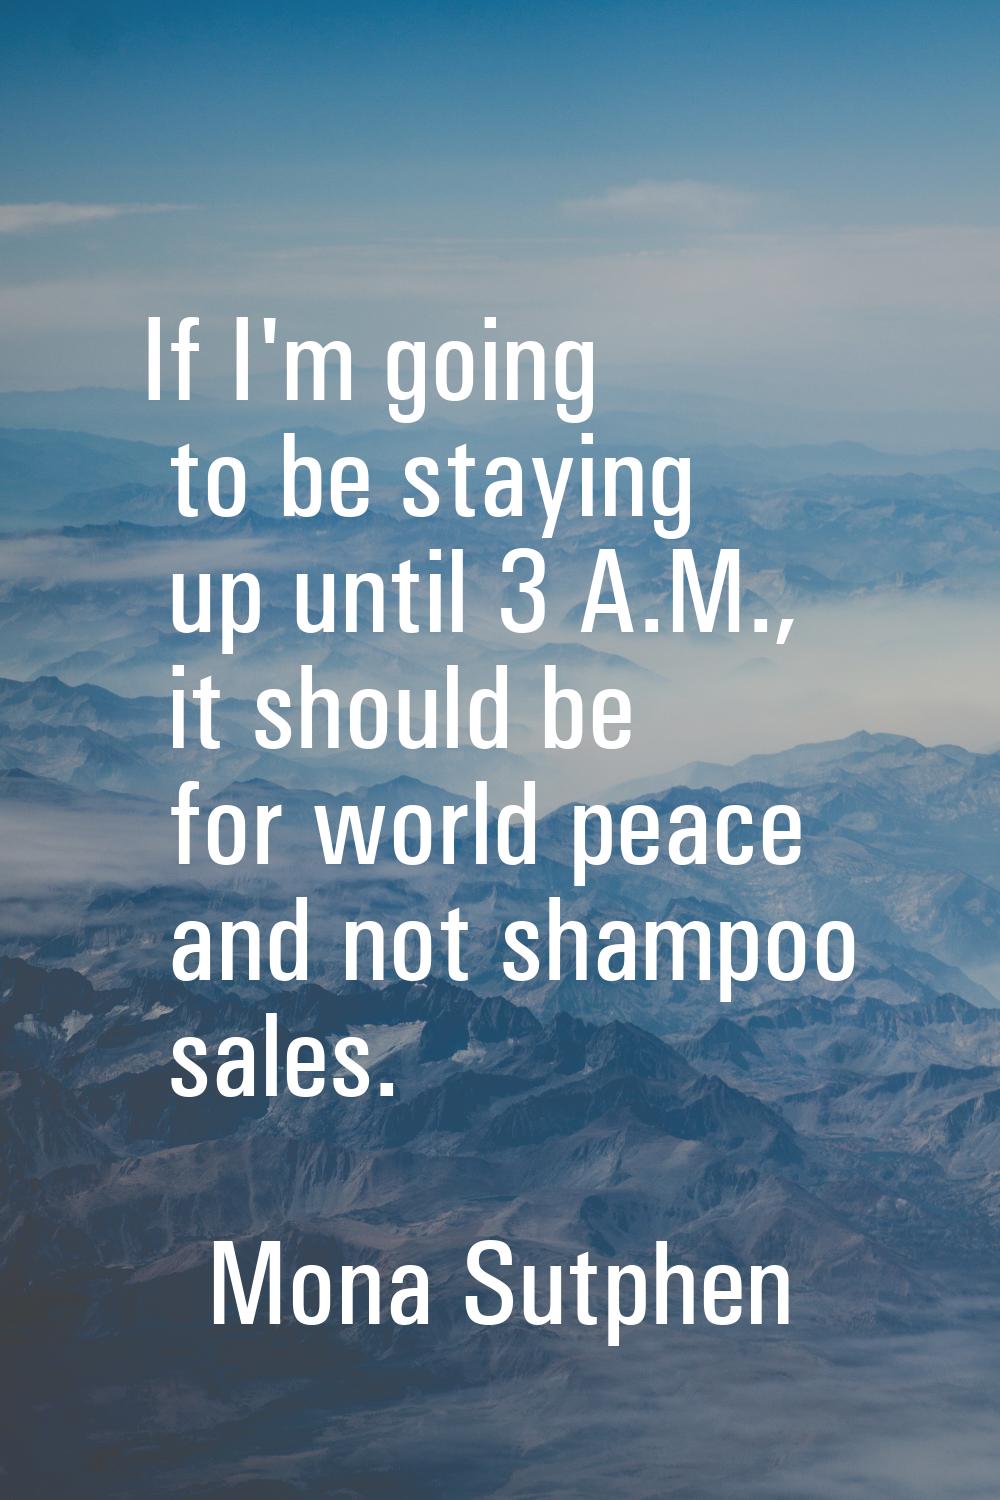 If I'm going to be staying up until 3 A.M., it should be for world peace and not shampoo sales.